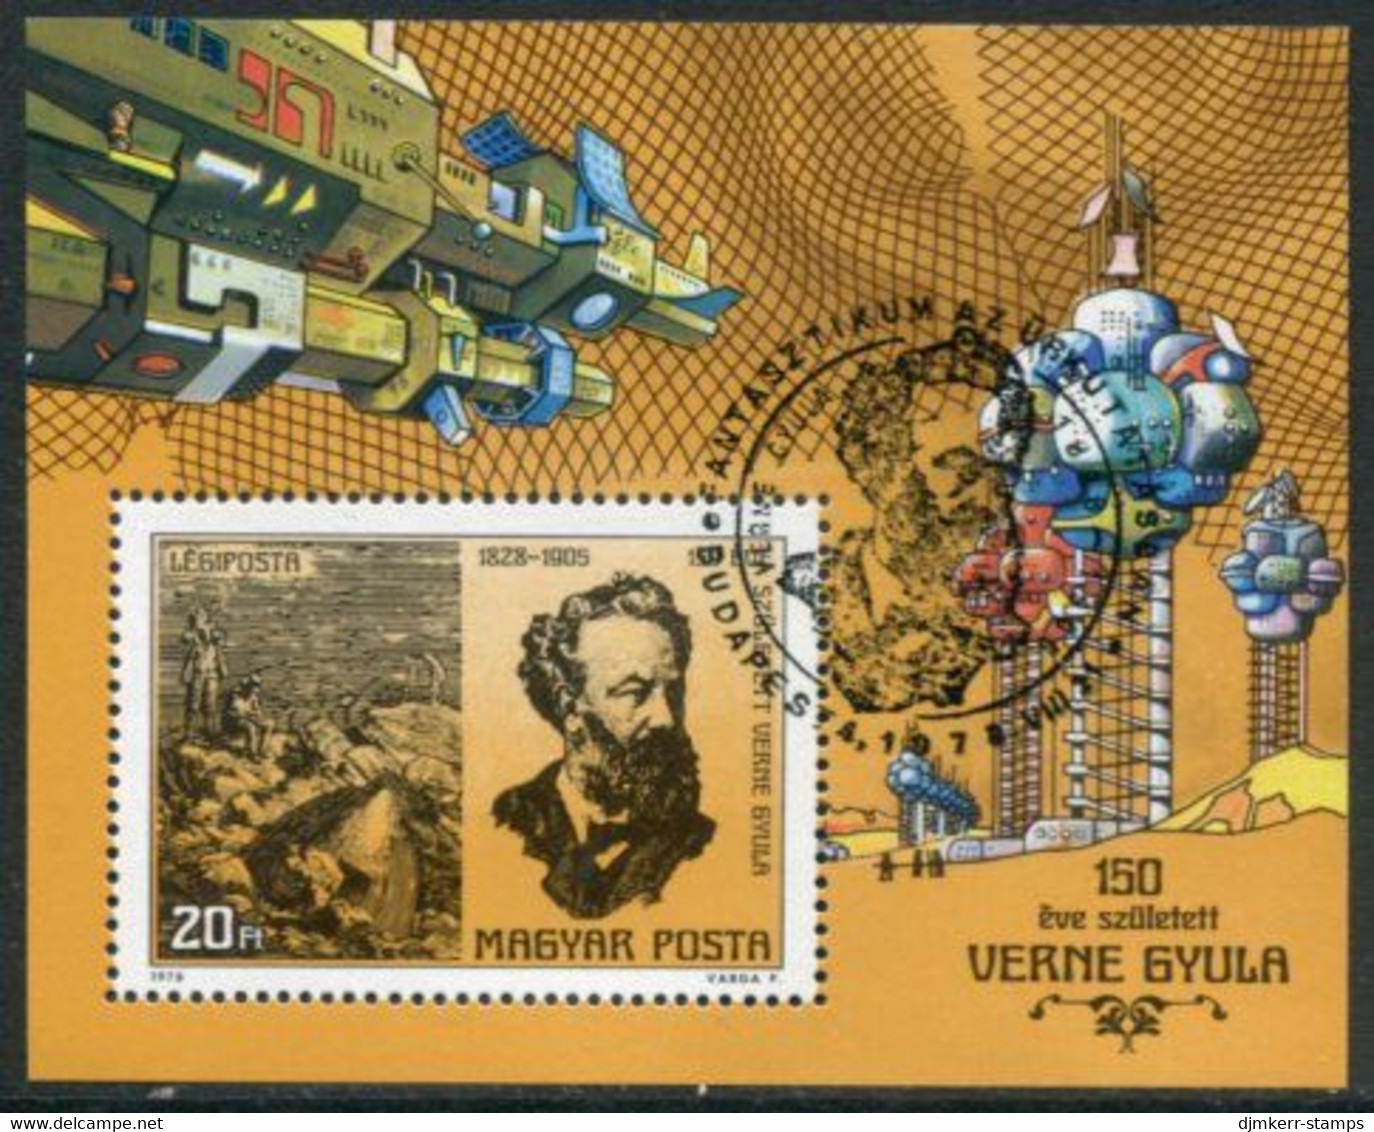 HUNGARY 1978  Jules Verne Block Used.  Michel Block 133 - Used Stamps